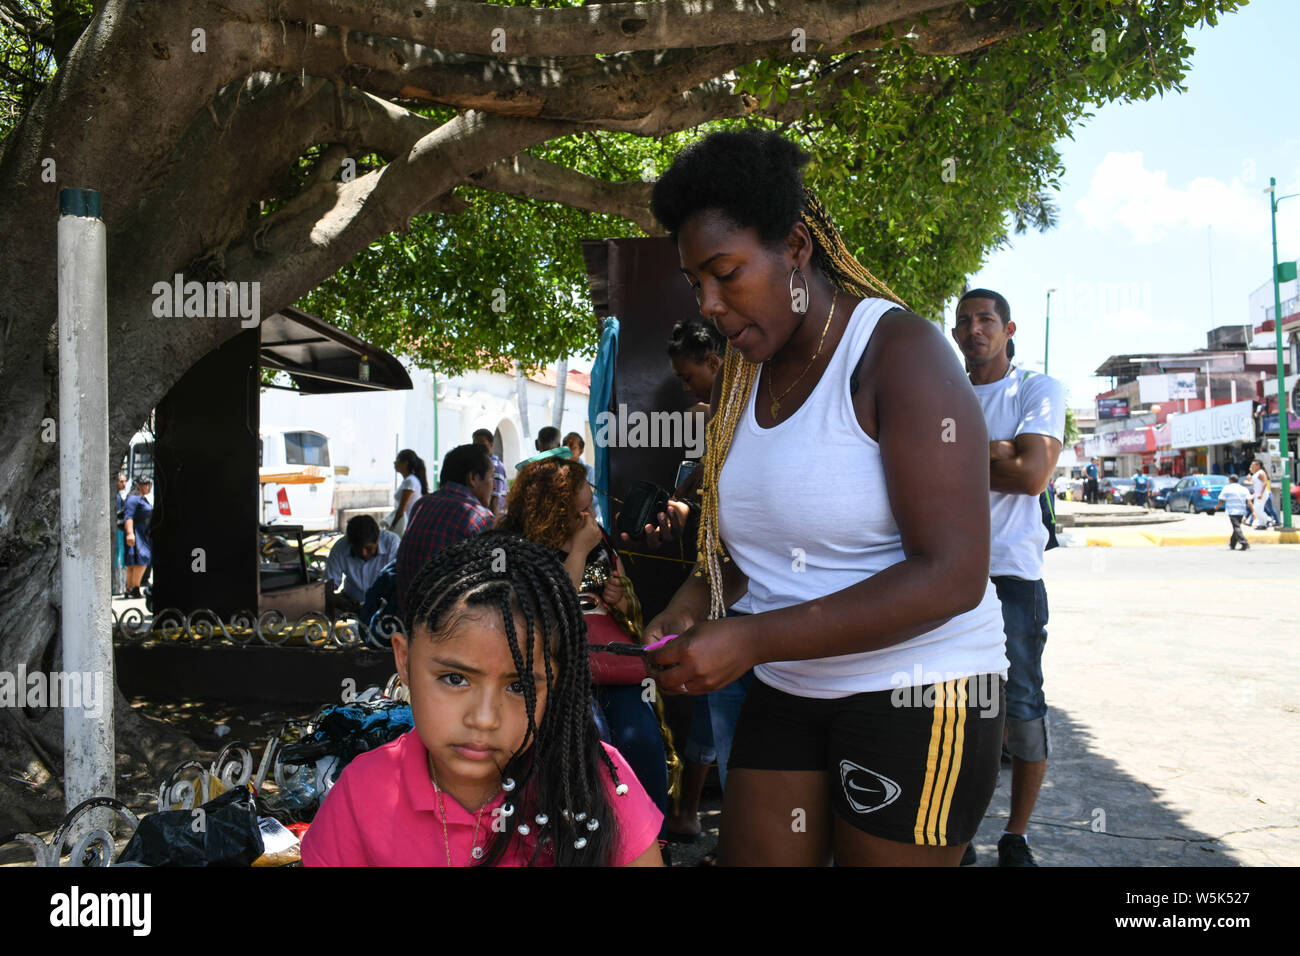 July 27, 2019, Tapachula, Chiapas, Mexico: The new global melting pot: EVELIN GONZALEZ, a Garifuna migrant from Honduras and now a Mexican resident, makes her living doing threads at main plaza, founding father Miguel Hidalgo in downtown Tapachula. Mexico has witnessed an increase of migrants crossing the country to reach the US, and now hundreds wander the streets of this southern Mexican city, which is becoming one more new global melting pot. Credit: Miguel Juarez Lugo/ZUMA Wire/Alamy Live News Stock Photo